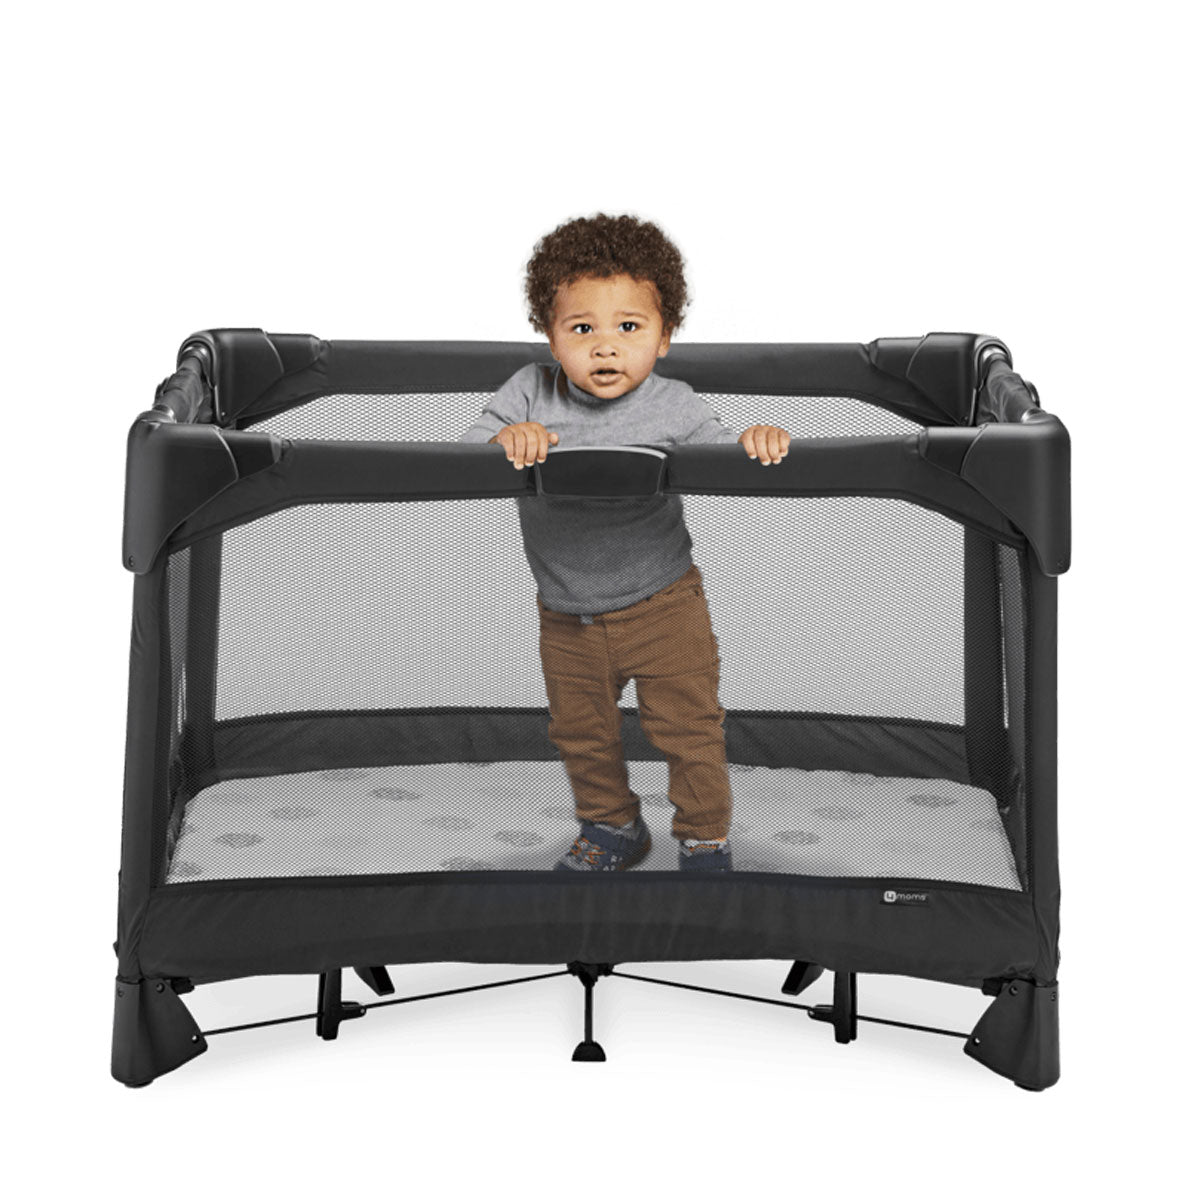 Toddler stands in 4moms breeze plus